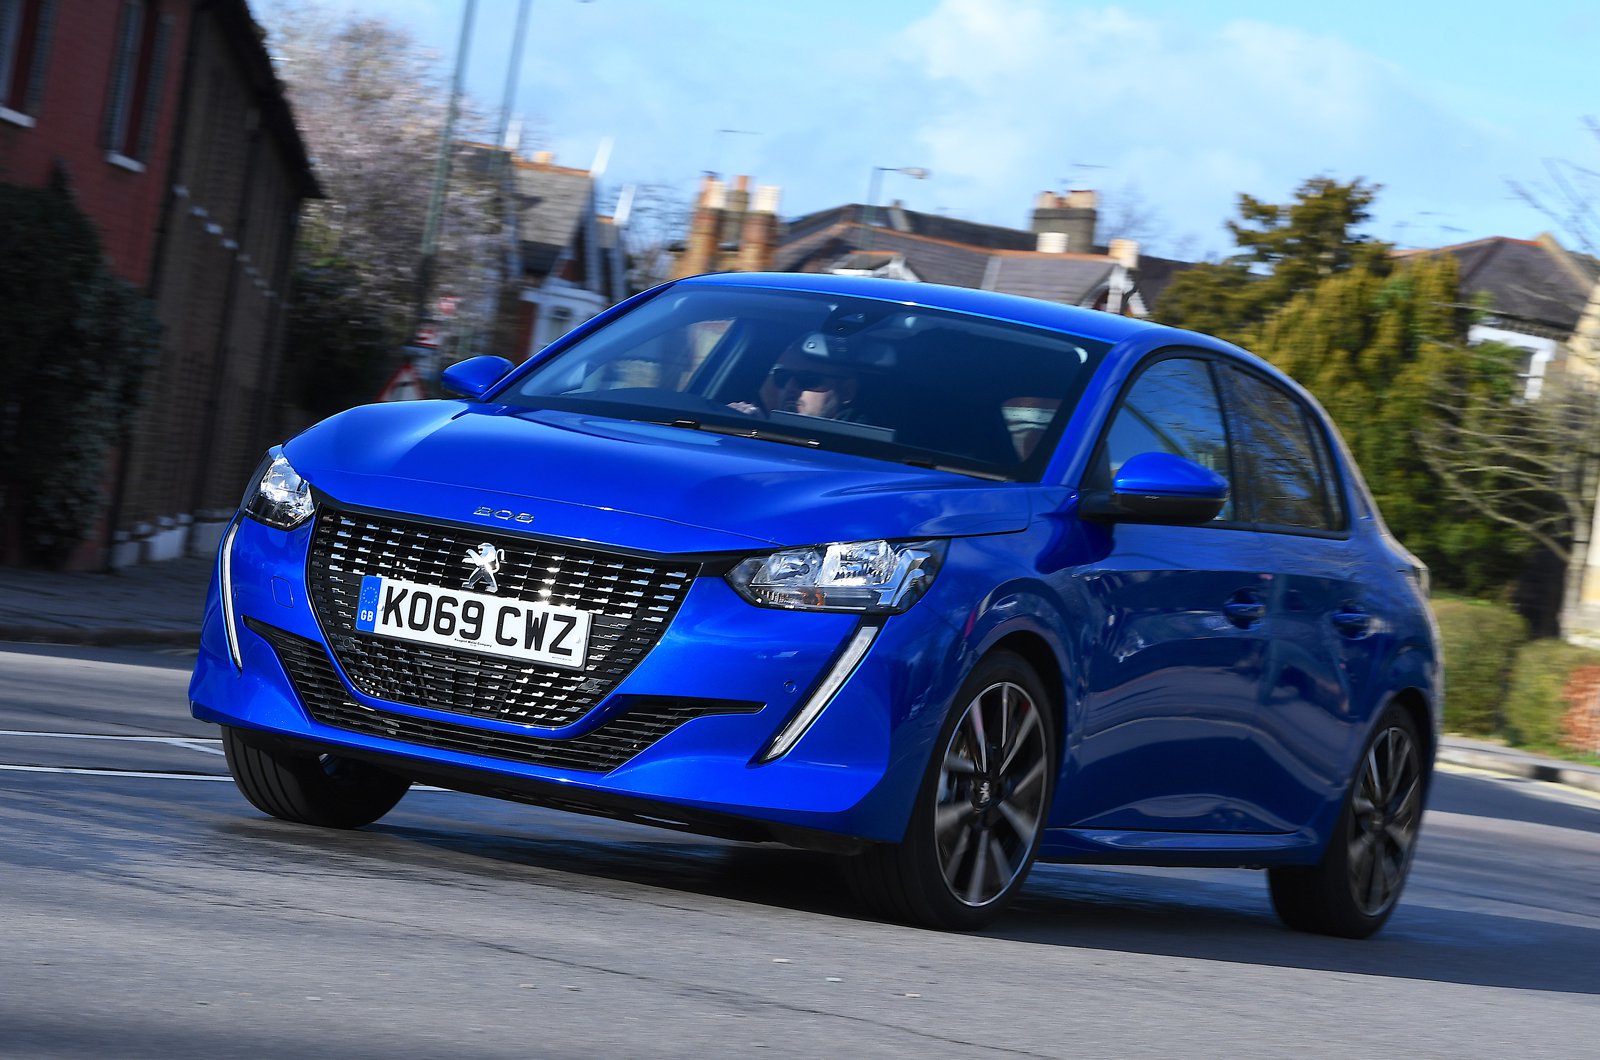 <h3><span><span><span><span><strong><strong><span><span>NEW Peugeot 208 Puretech 100 GT Line</span></span></strong></strong></span></span></span></span></h3>  <ul>  <li><span><span><span><span><strong><span><span>List price</span></span></strong><span><span> - £20,700</span></span></span></span></span></span></li>  <li><span><span><span><span><strong><span><span>Target Price</span></span></strong><span><span> - £19,257</span></span></span></span></span></span></li> </ul>  <p><span><span><span><span><span><span><span><span><span><span><span><span>New 208 has already impressed against mainstream rivals, but can it compete with premium options?</span></span></span></span></span></span></span></span></span></span></span></span></p>